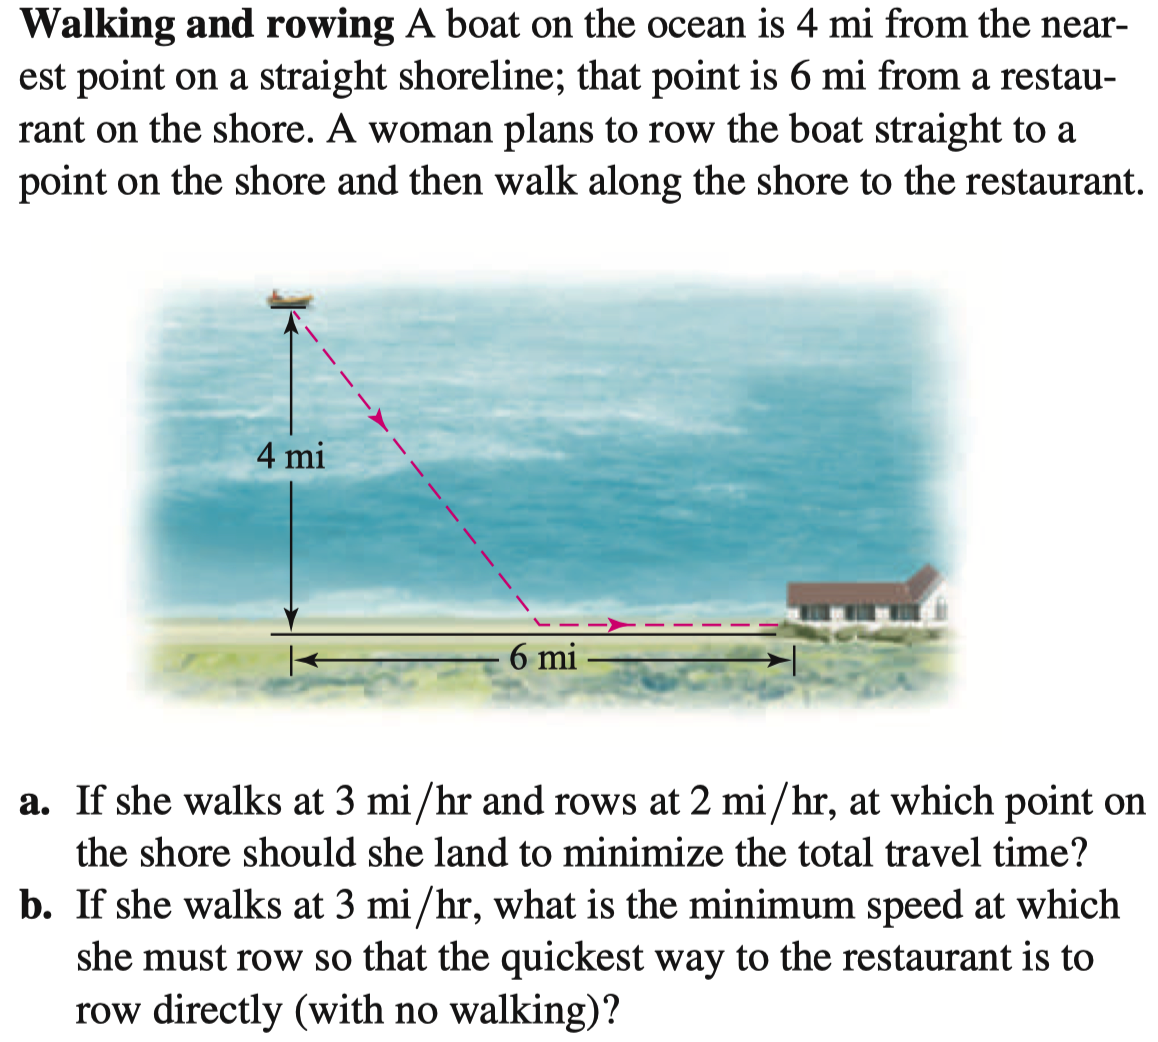 Walking and rowing A boat on the ocean is 4 mi from the near-
est point on a straight shoreline; that point is 6 mi from a restau-
rant on the shore. A woman plans to row the boat straight to a
point on the shore and then walk along the shore to the restaurant.
4 mi
6 mi
a. If she walks at 3 mi/hr and rows at 2 mi/hr, at which point on
the shore should she land to minimize the total travel time?
b. If she walks at 3 mi/hr, what is the minimum speed at which
she must row so that the quickest way to the restaurant is to
row directly (with no walking)?
